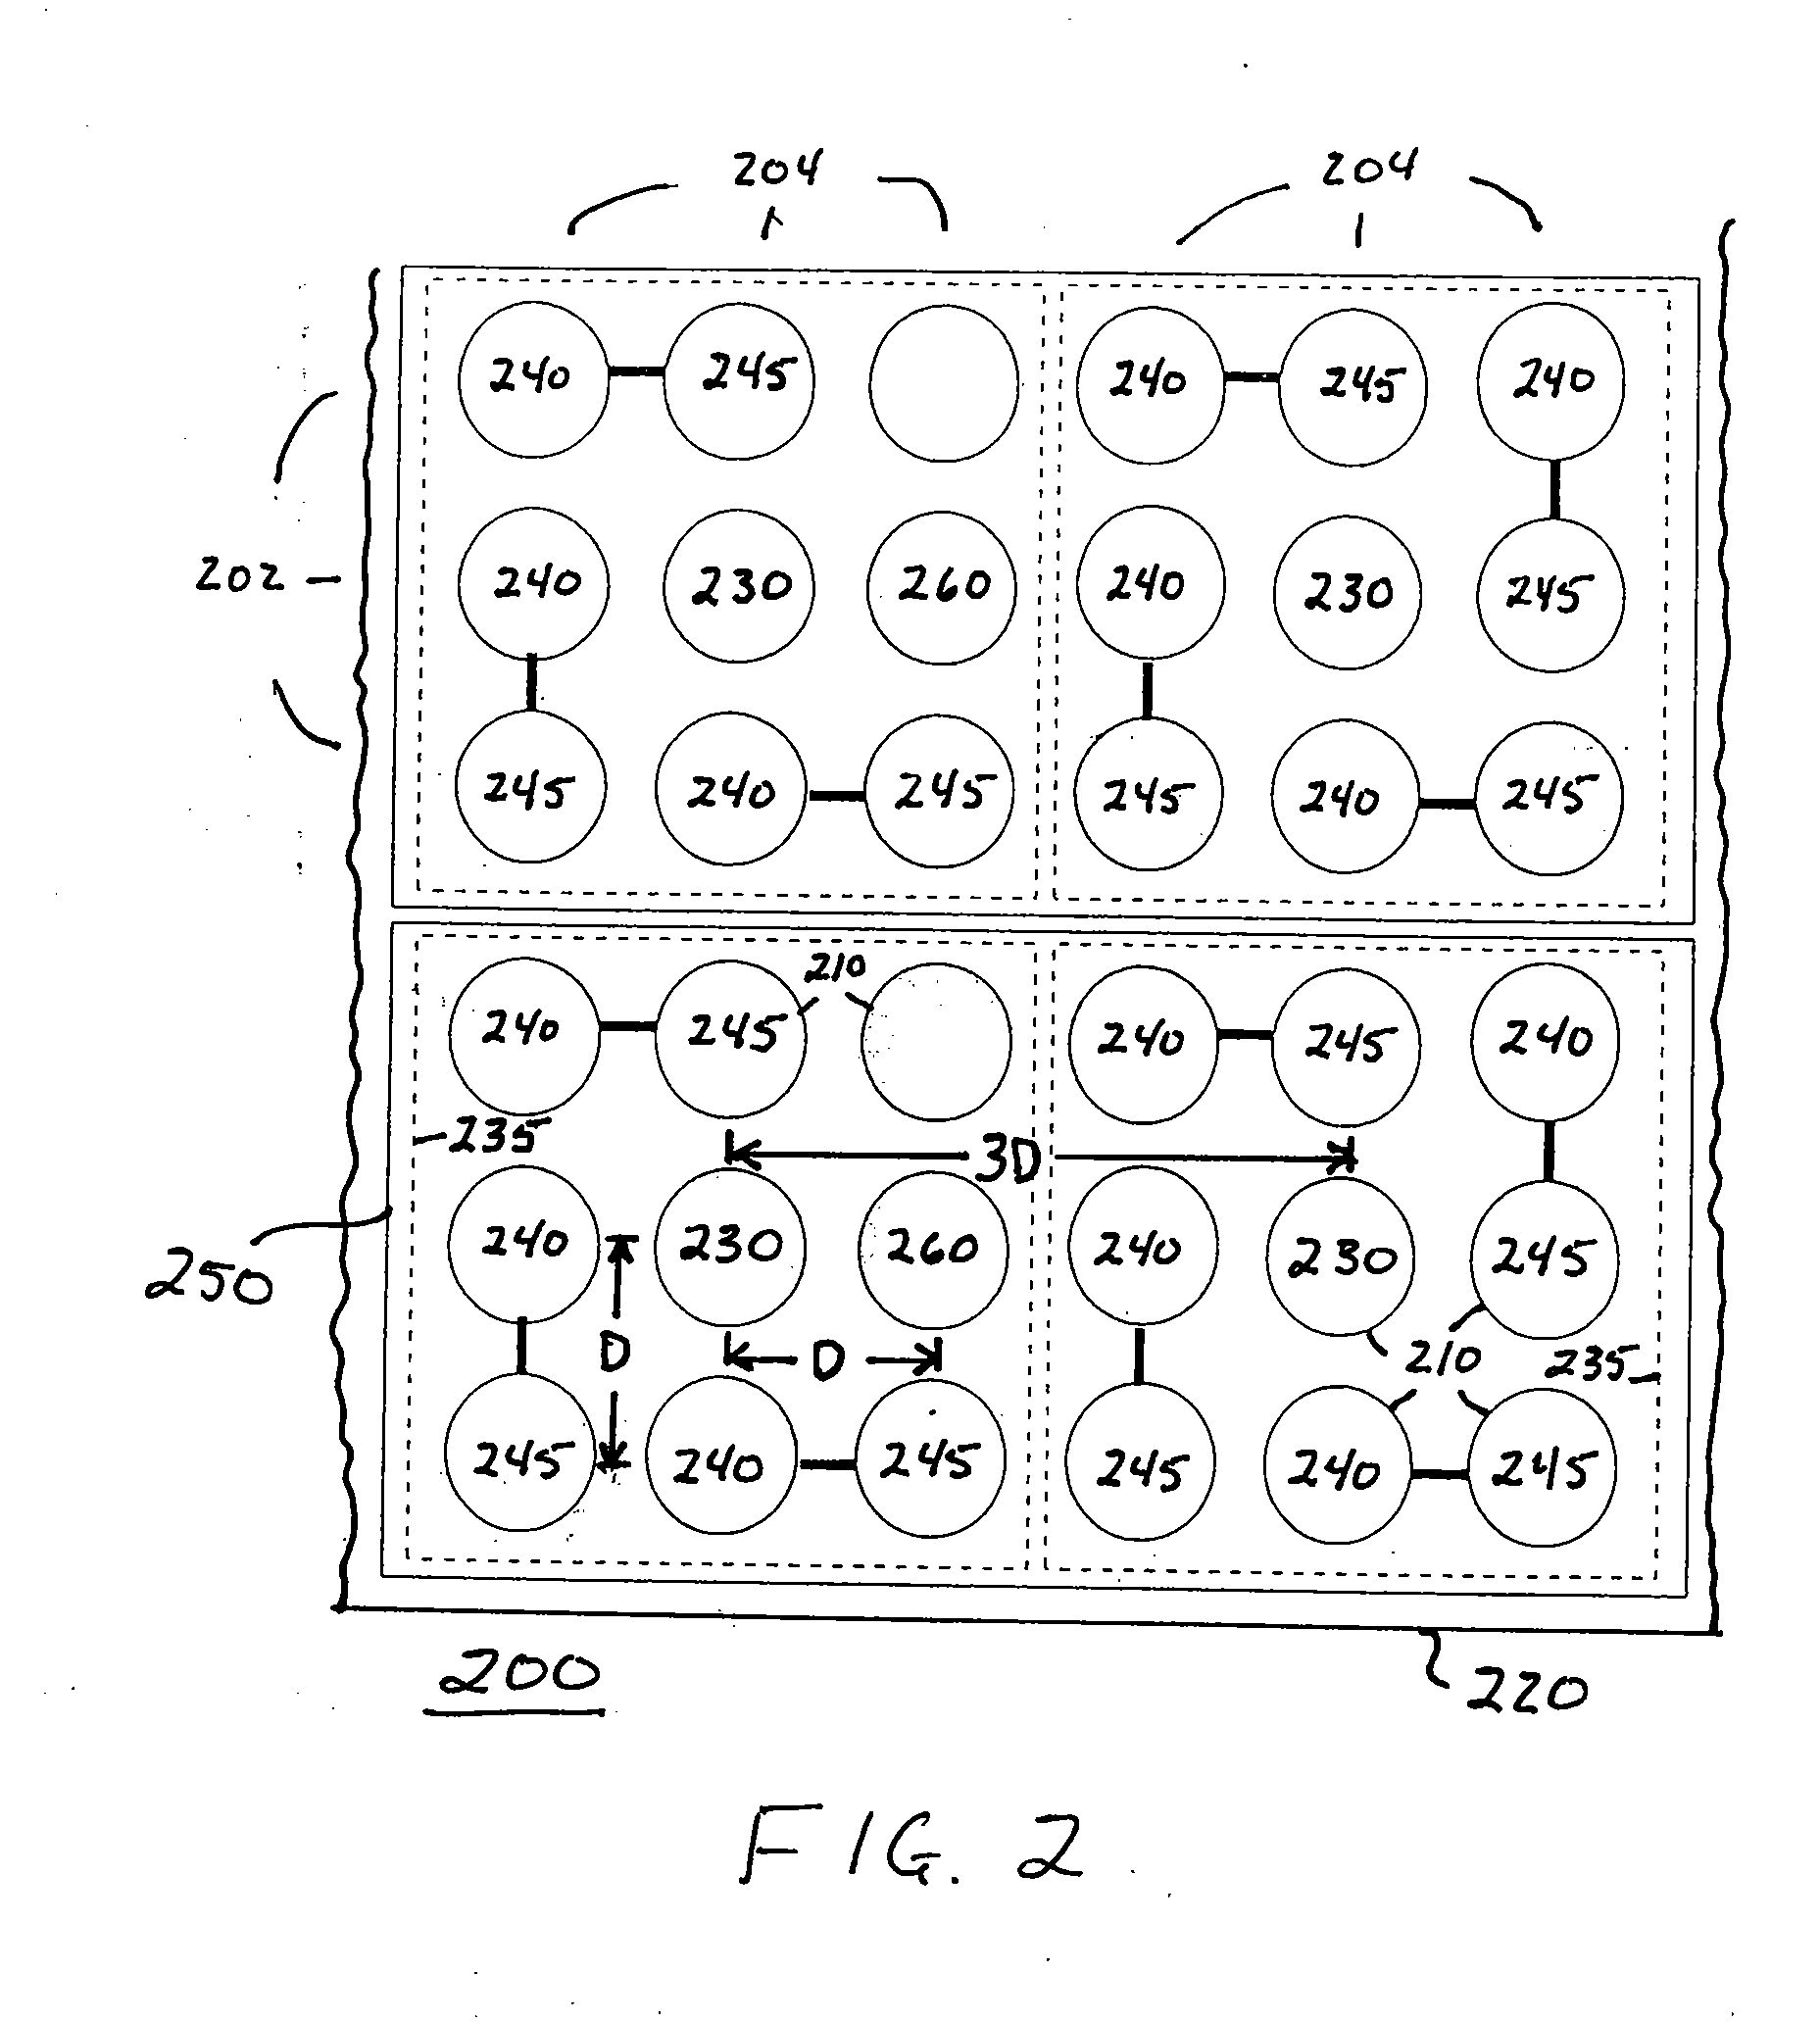 Interconnect pattern for high performance interfaces